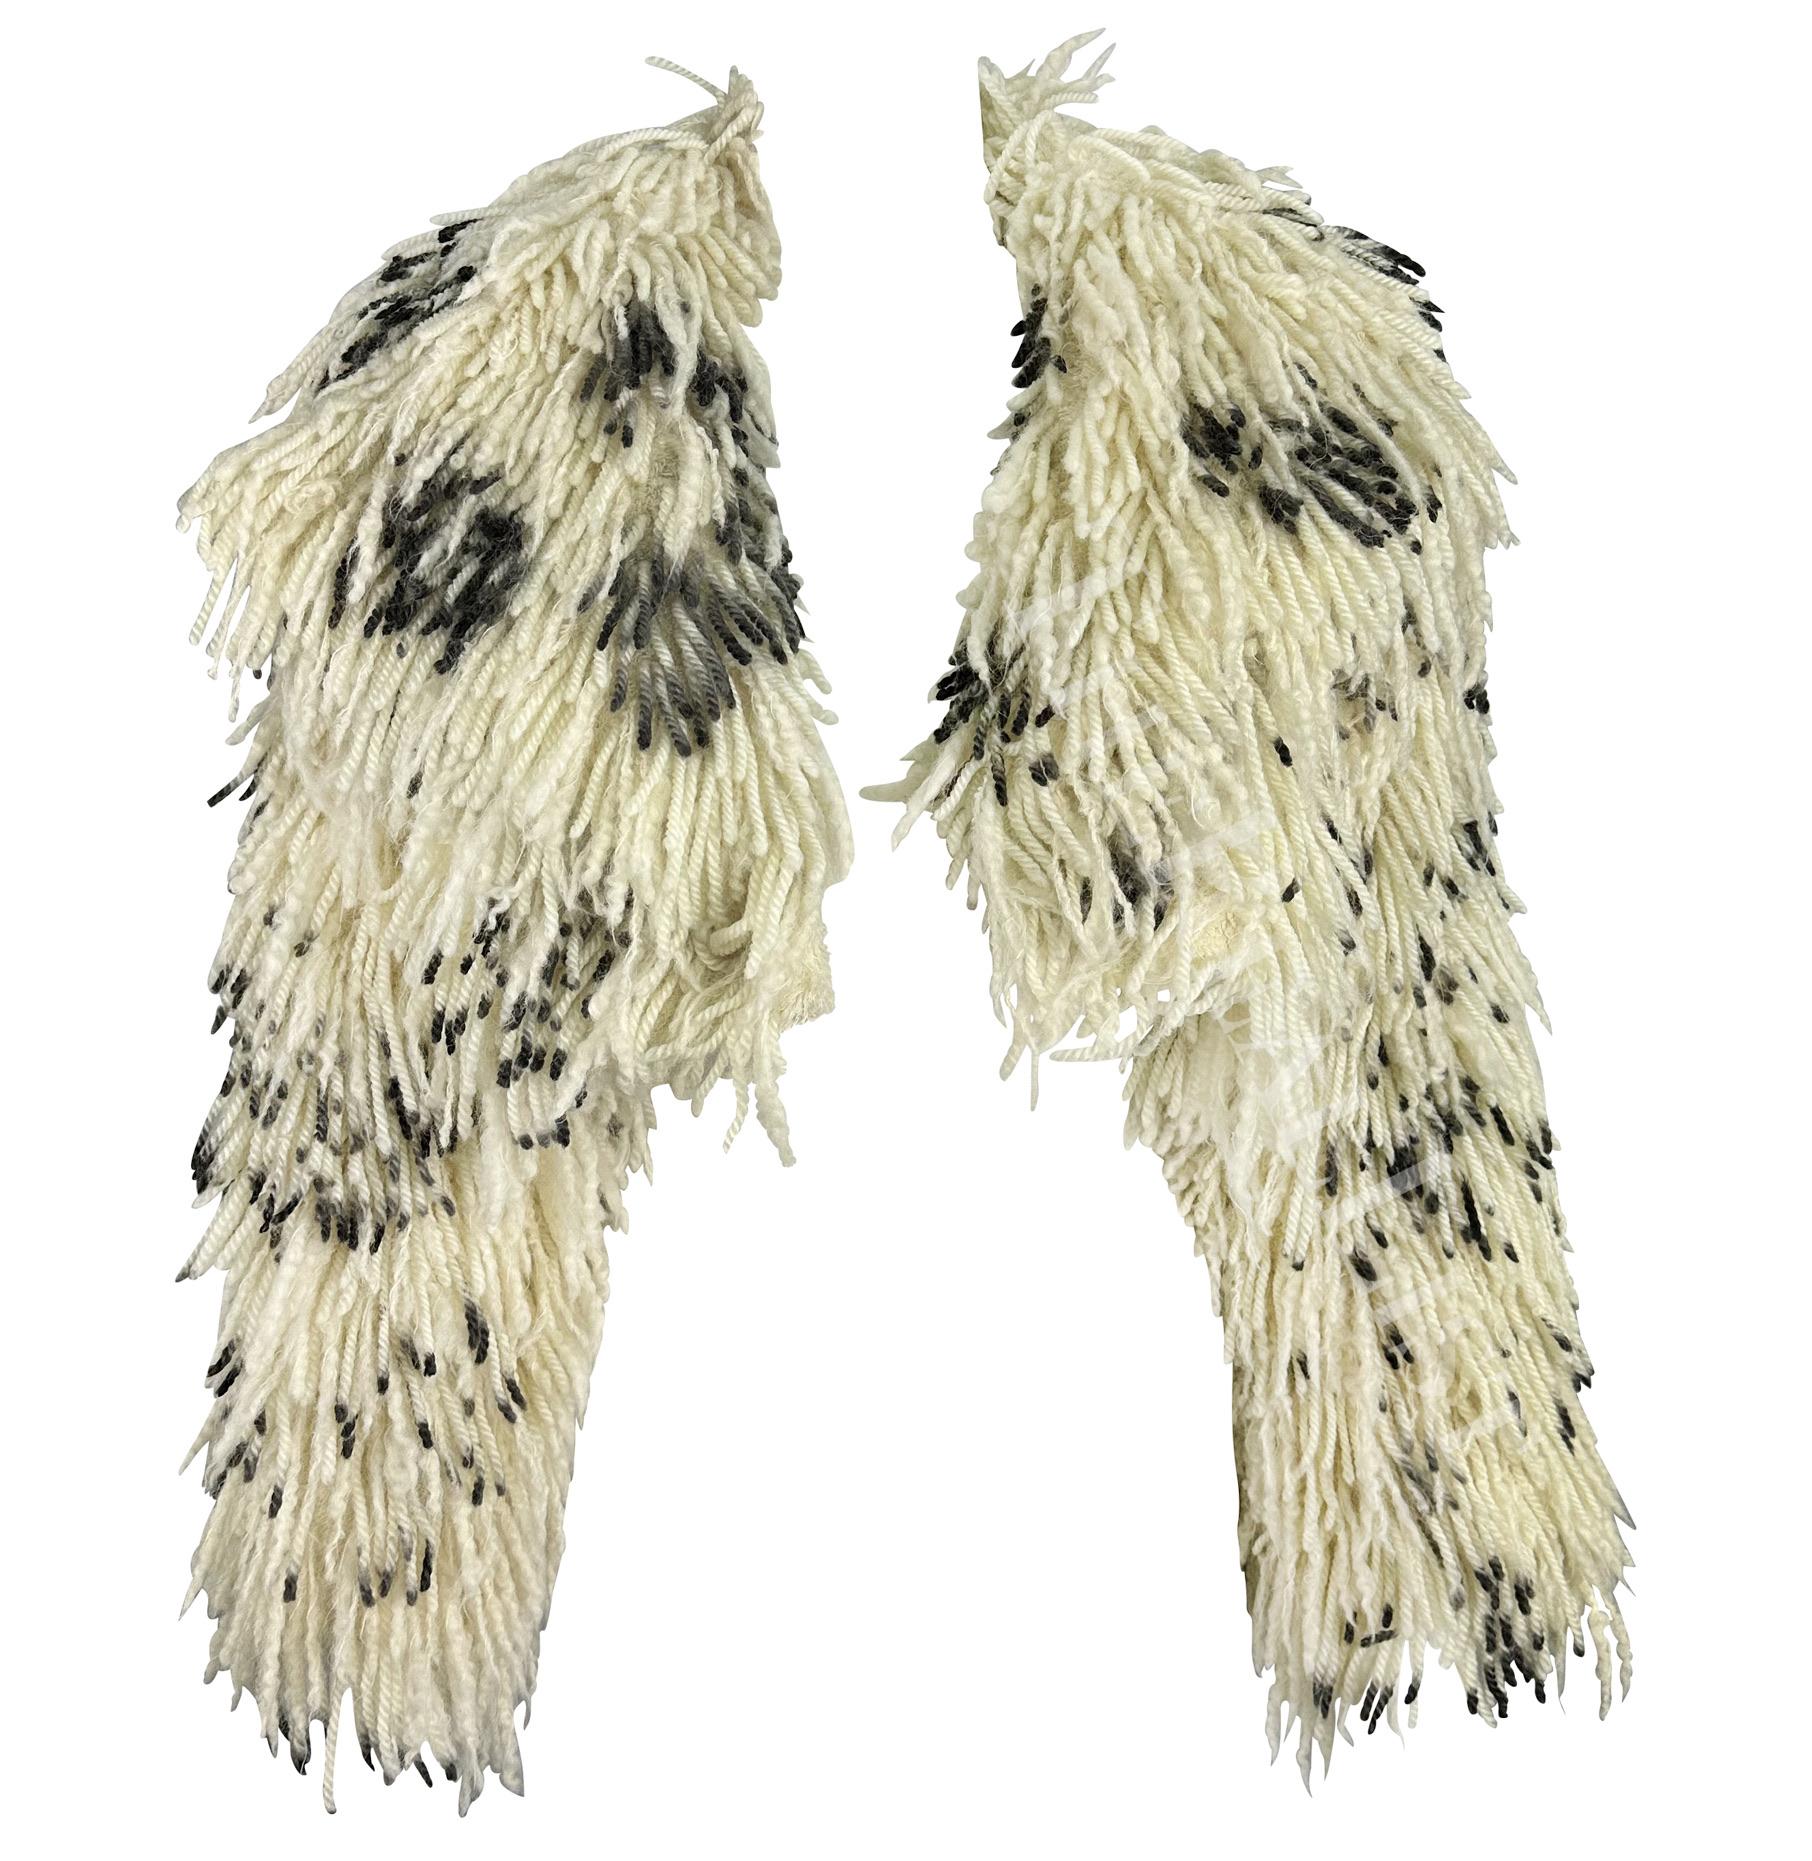 Presenting an incredible creme fringe Atelier Versace cropped coat. From the Fall/Winter 1994 collection, this voluminous coat is constructed of creme wool fringe with black spots scattered throughout. Similar shag fringe coats debuted on the